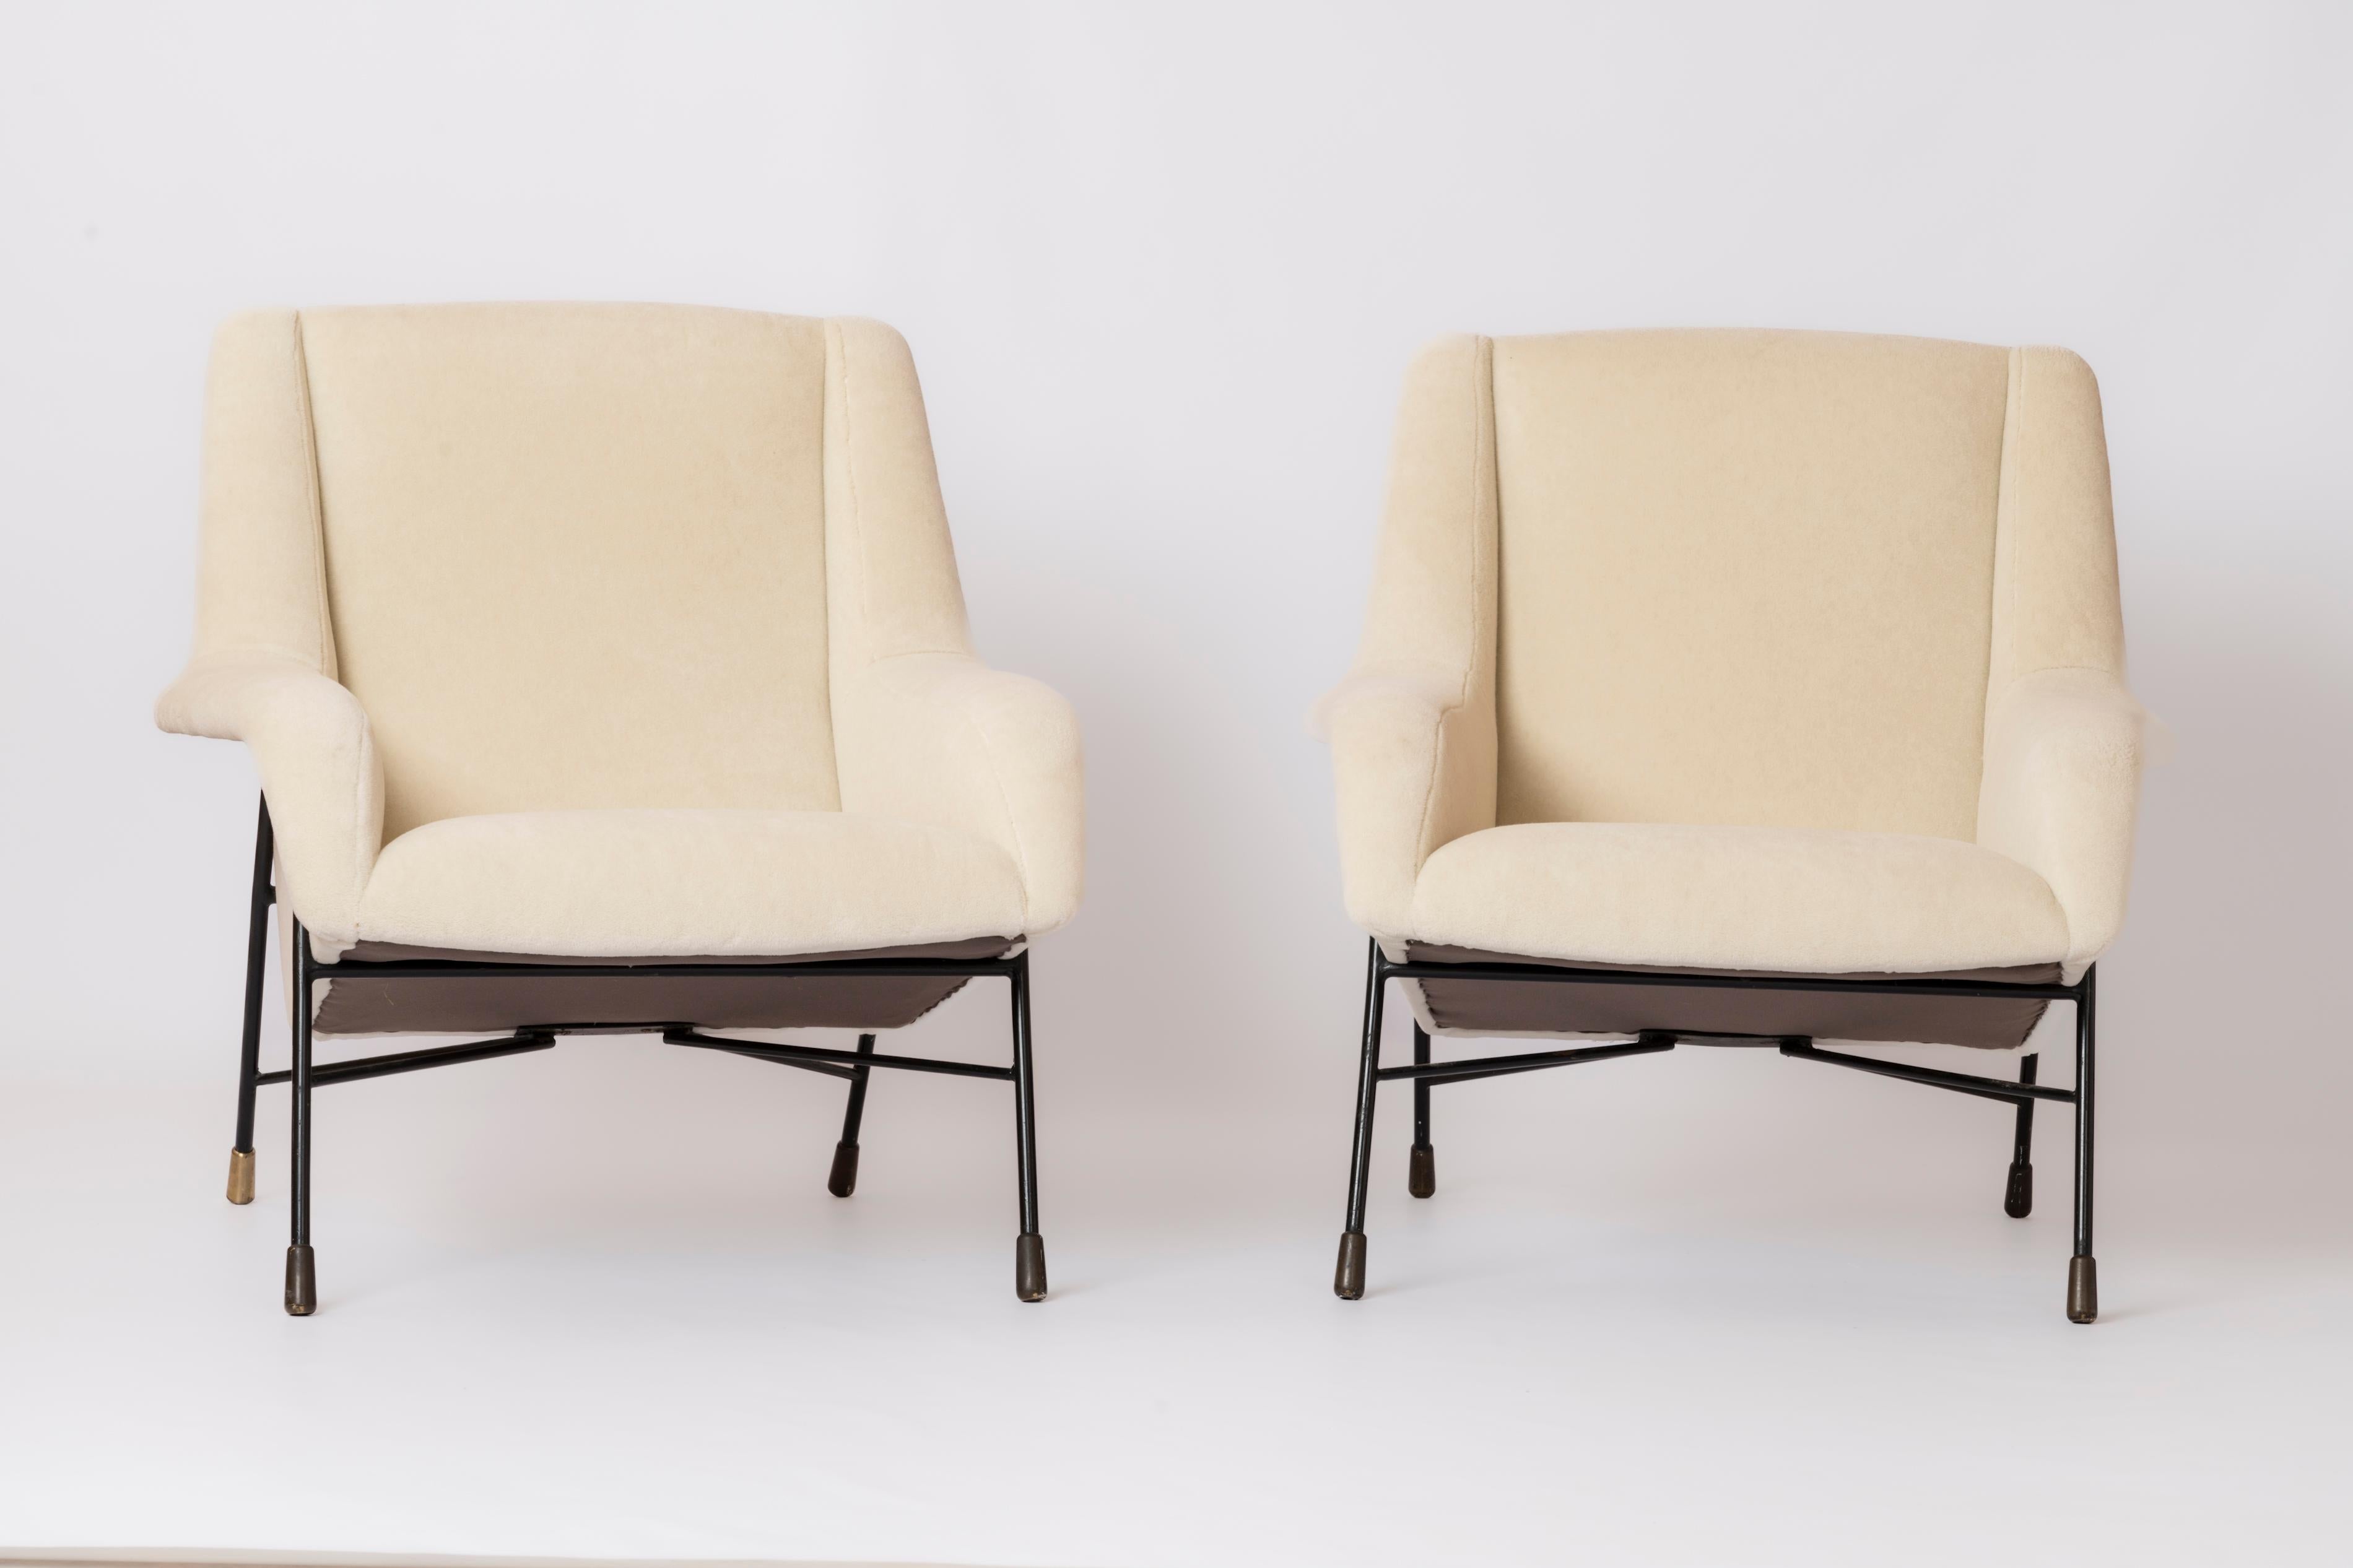 Rare pair of lounge chairs by the known Belgium designer Alfred Hendrickx. The models shown is documented as the S12 model produced by Belform, Belgium in the late 1950s.
Freshly re-upholstered in plush cream Pierre Frey 